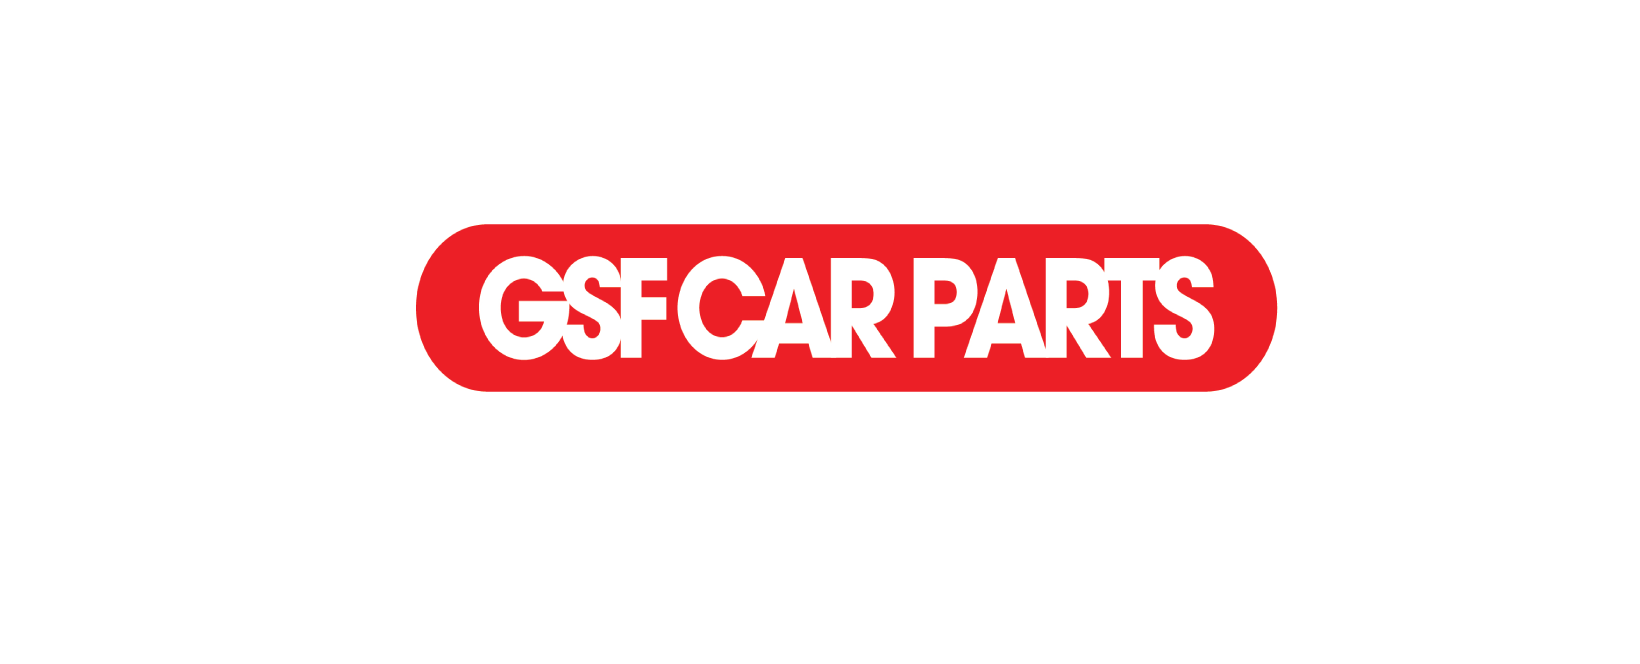 GSF Car Parts Discount Code 2023